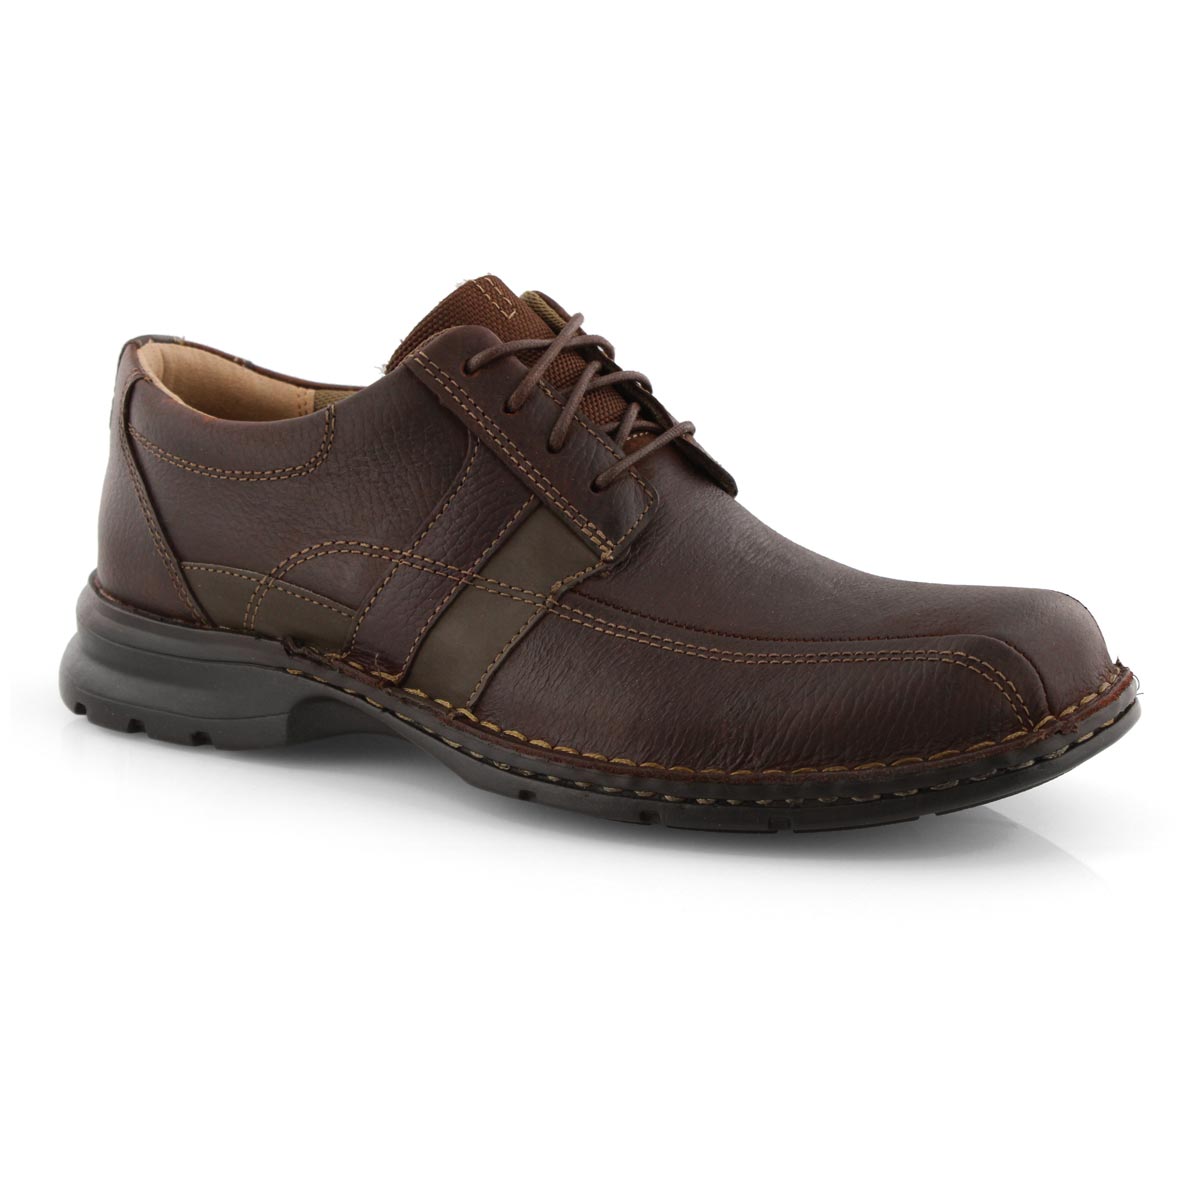 softmoc clarks shoes